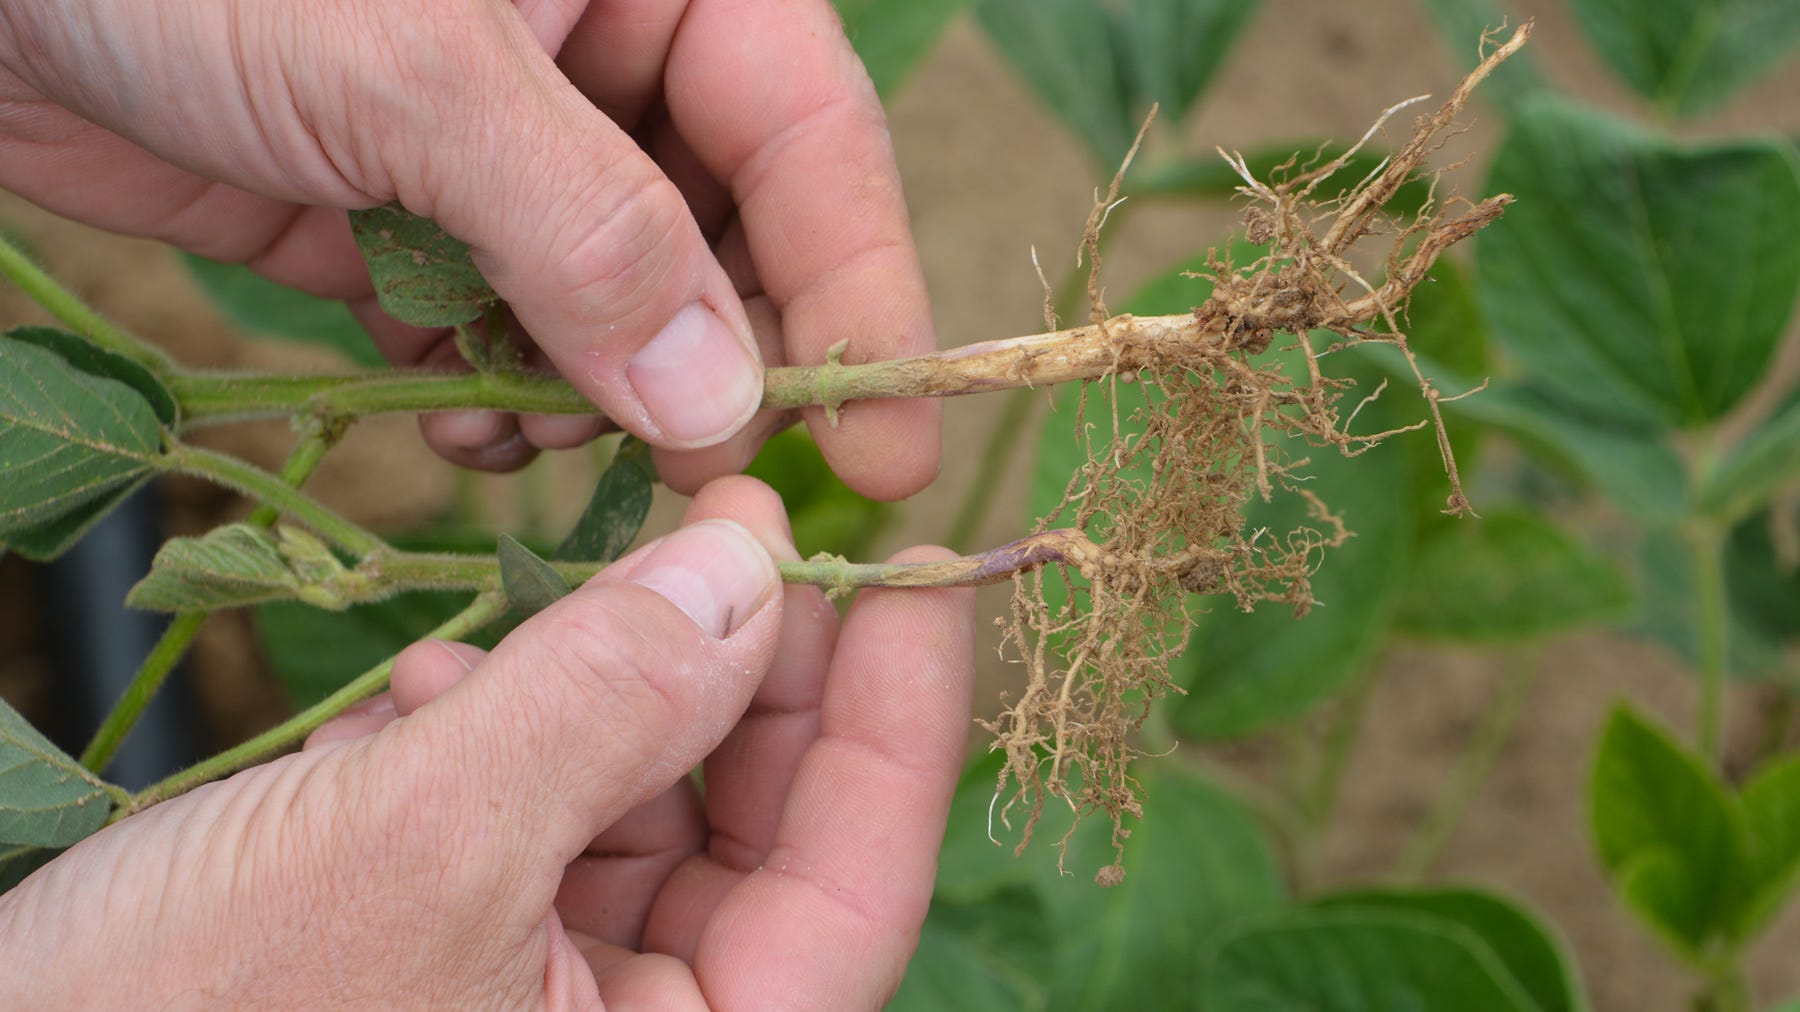 two dug-up soybean seedlings being compared